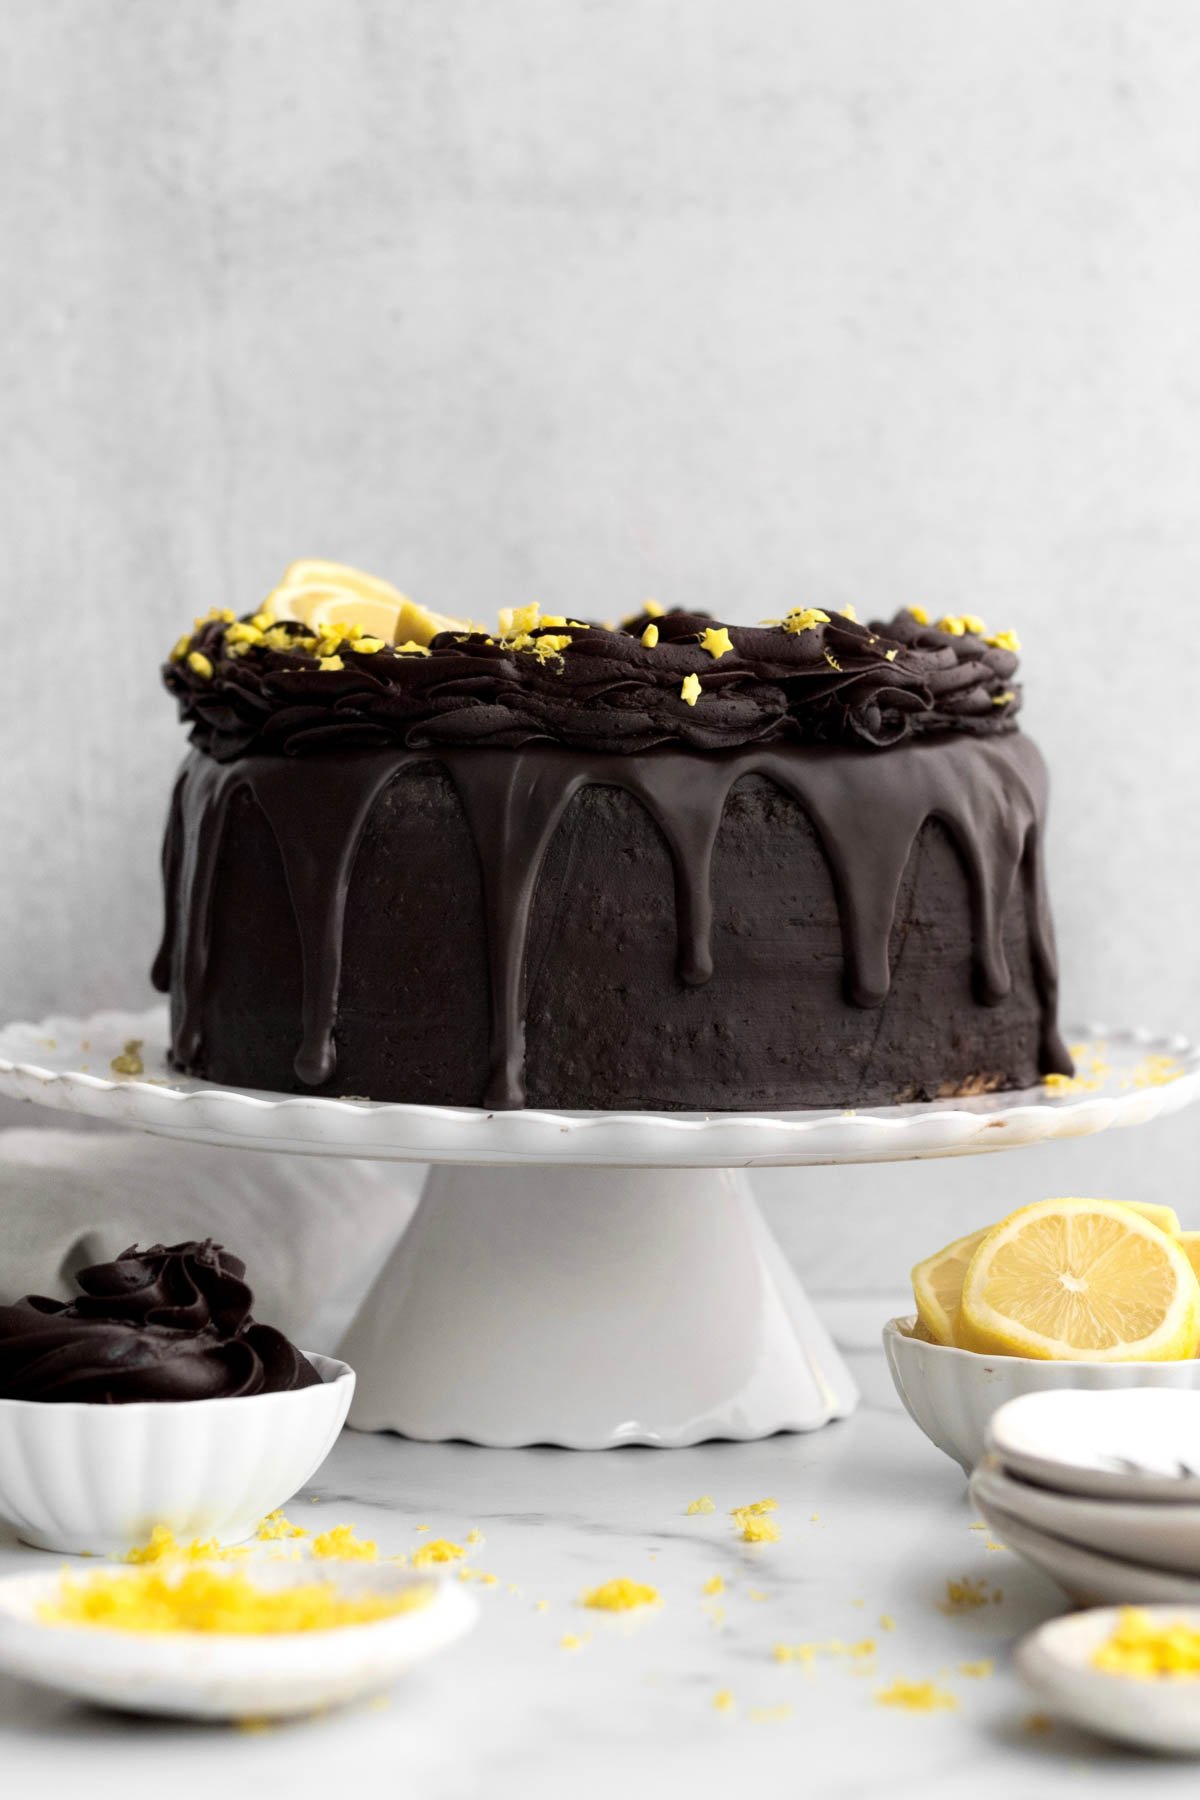 Chocolate Lemon Cake on a stand with star sprinkles and slices of lemon.